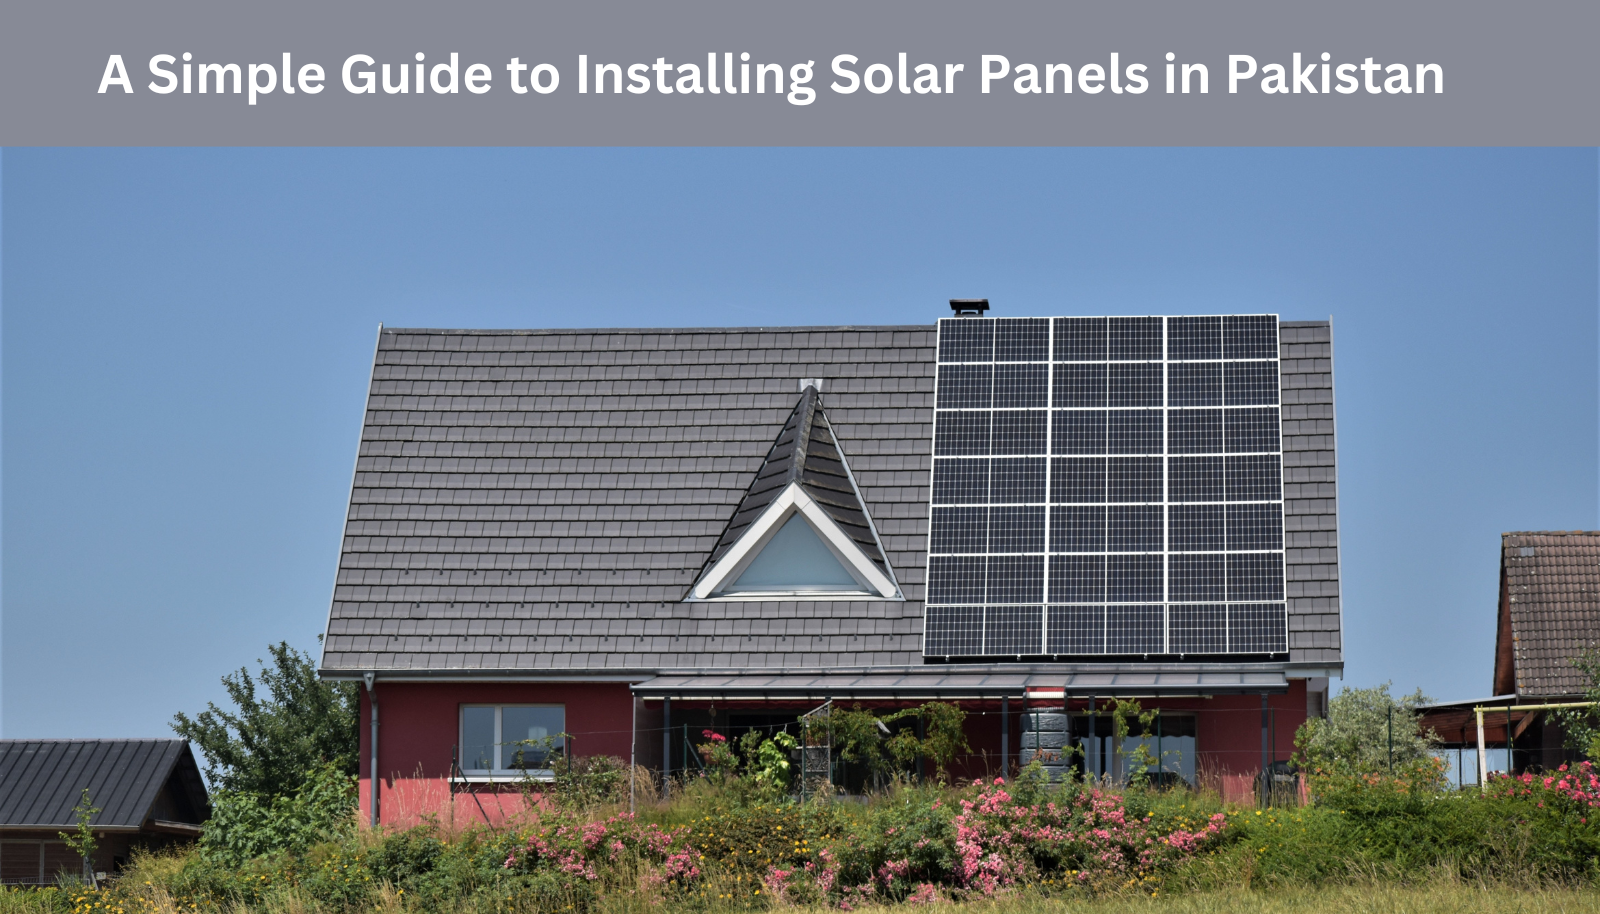 A Simple Guide to Installing Solar Panels in Pakistan